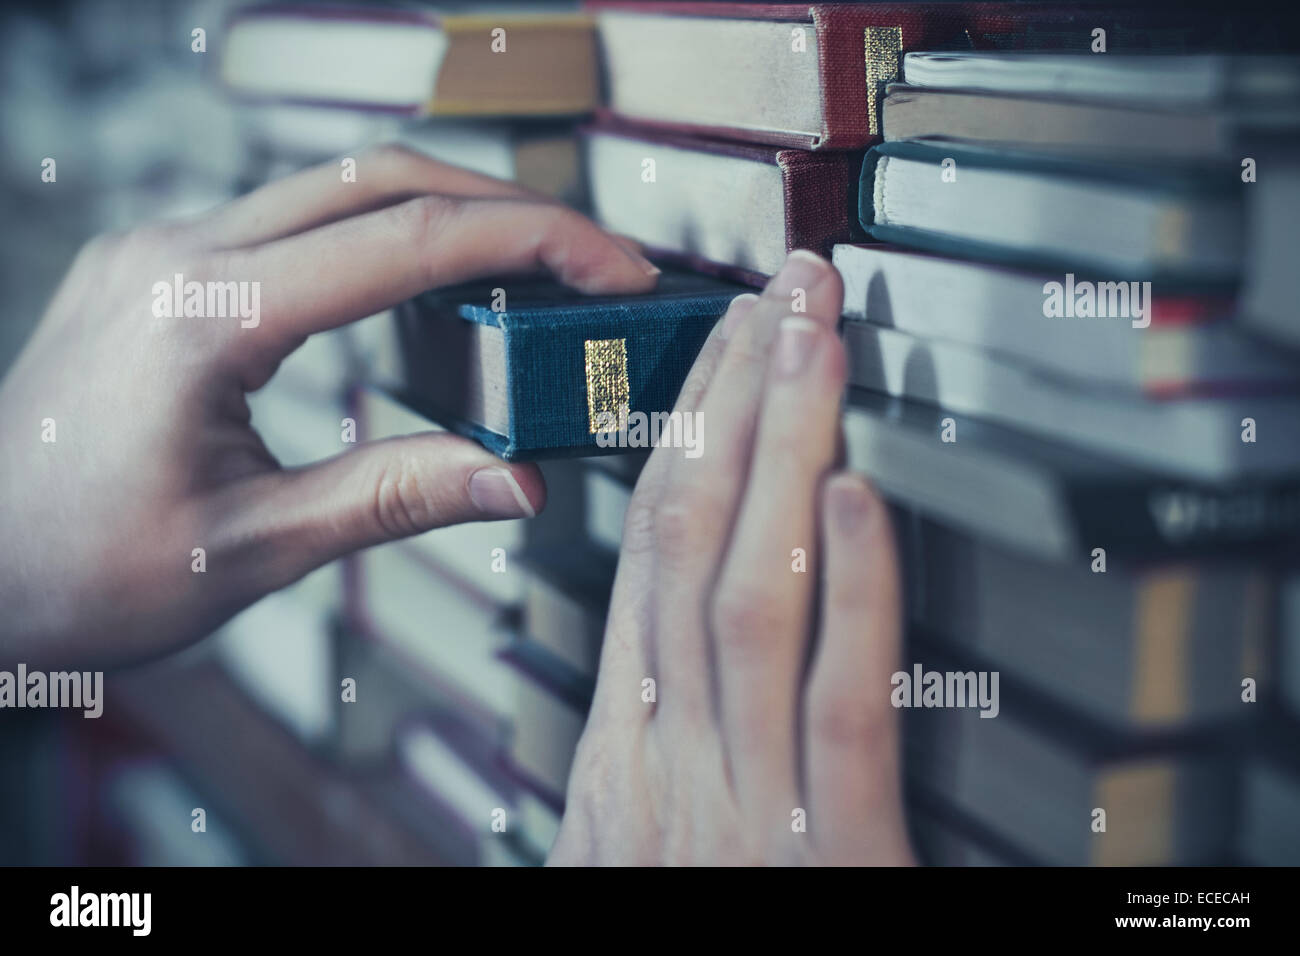 Woman taking a book from shelf Stock Photo